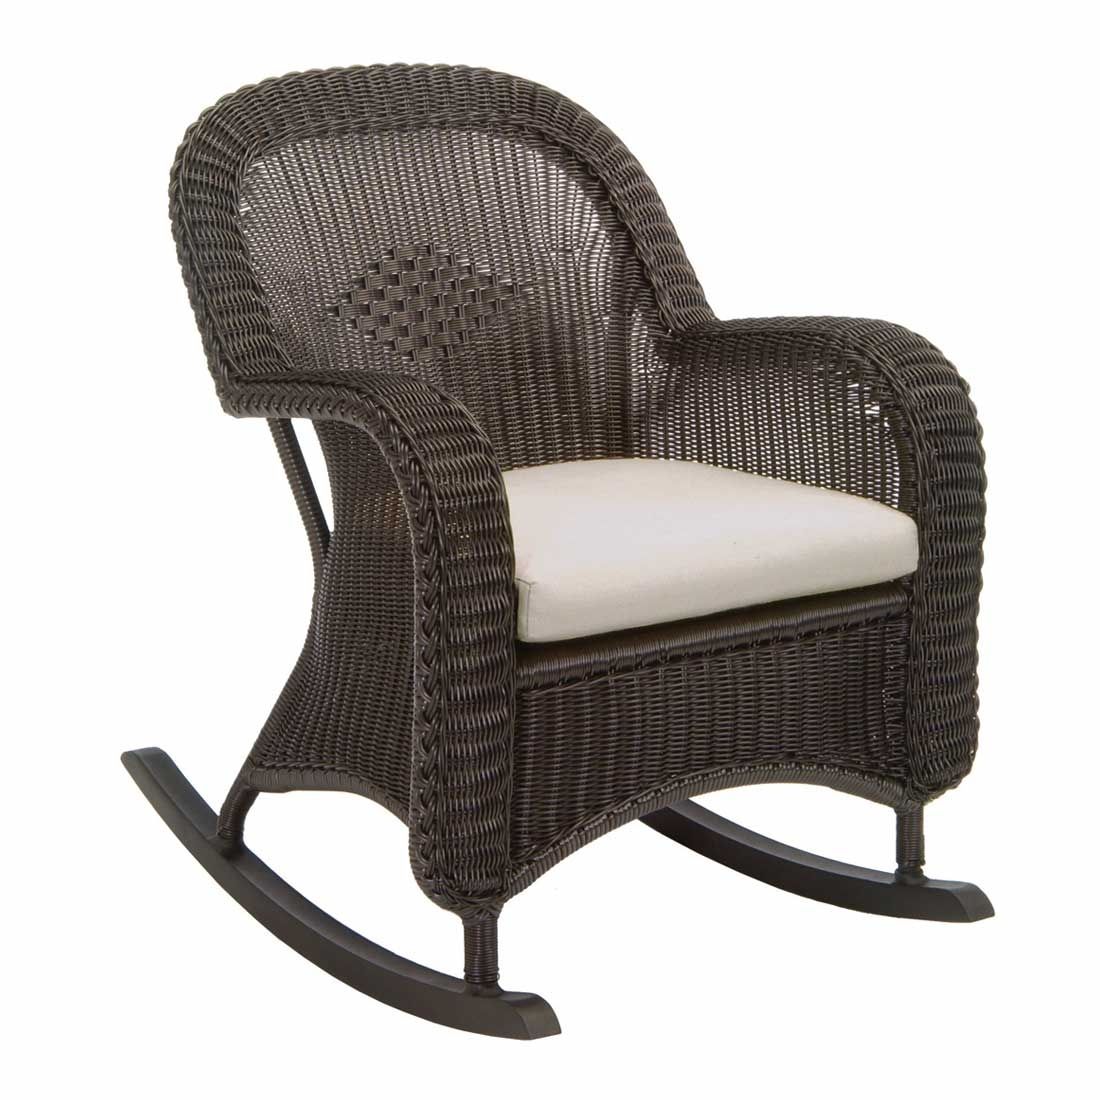 Classic Outdoor Wicker Rocking Chair In Wicker Rocking Chairs For Outdoors (View 15 of 15)